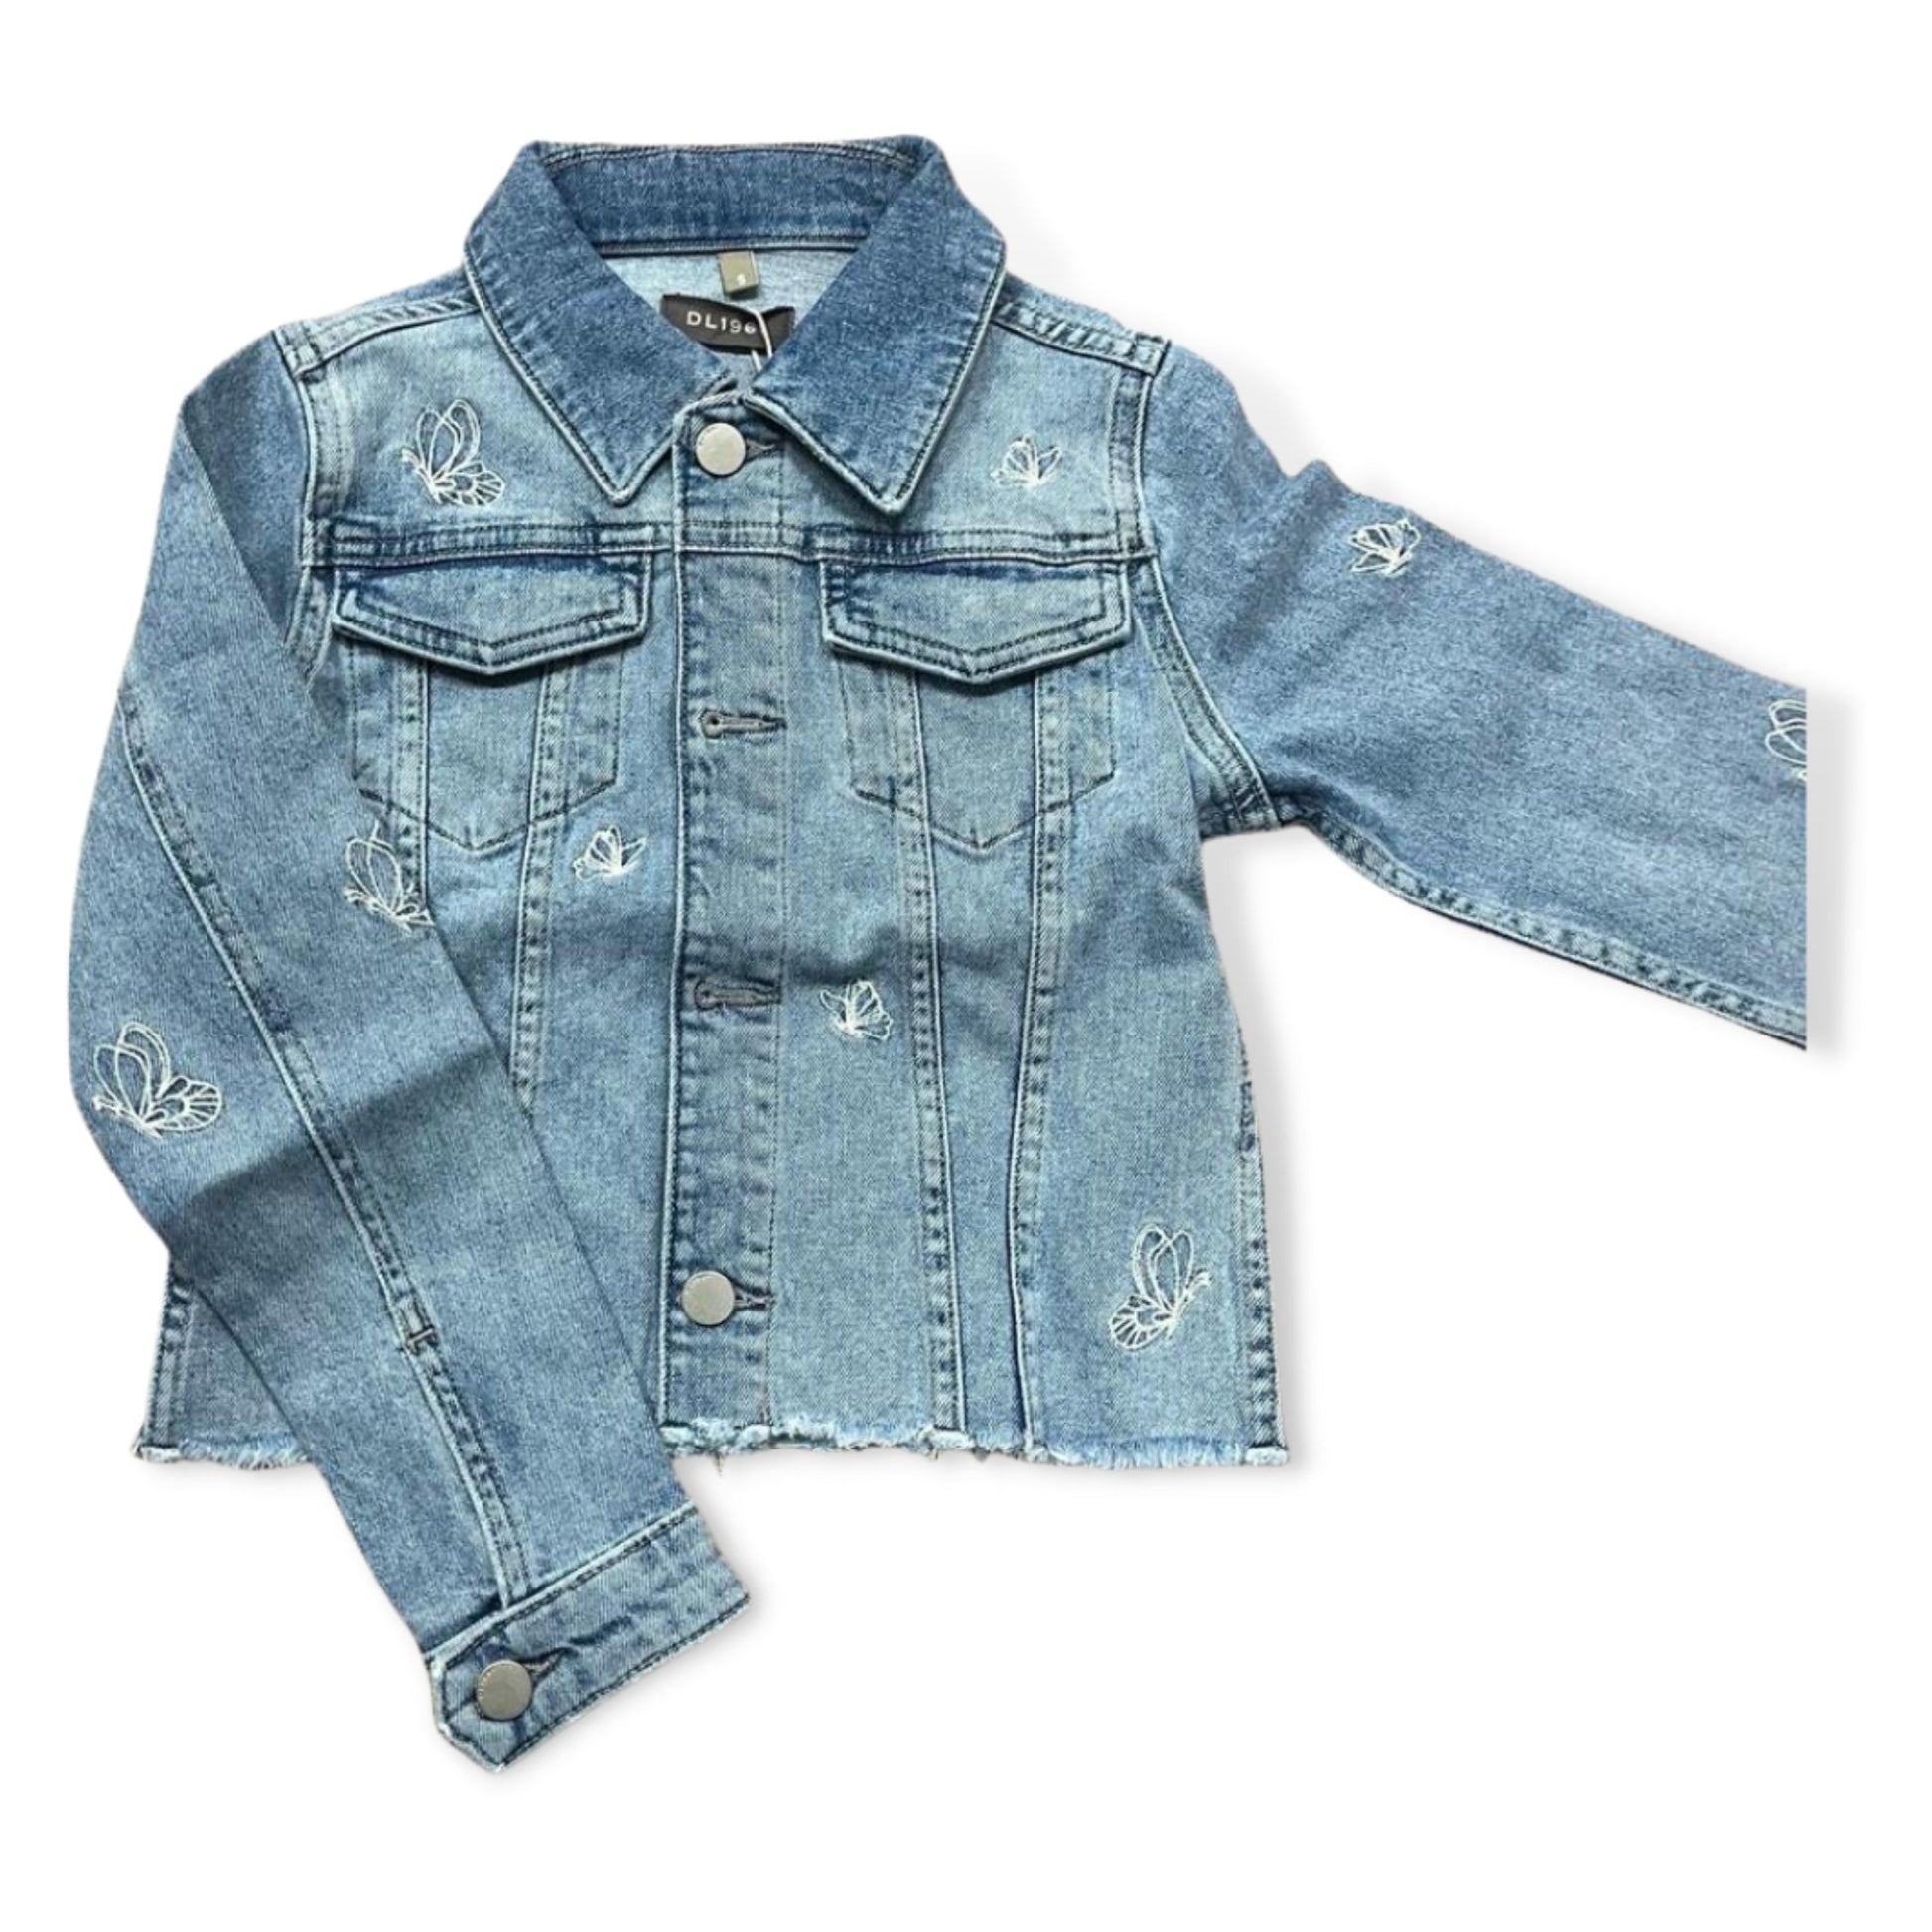 DL1961 Denim Jacket with Butterfly Embroidered Stitching - a Spirit Animal - Jacket $60-$90 active Apr 2023 Blue